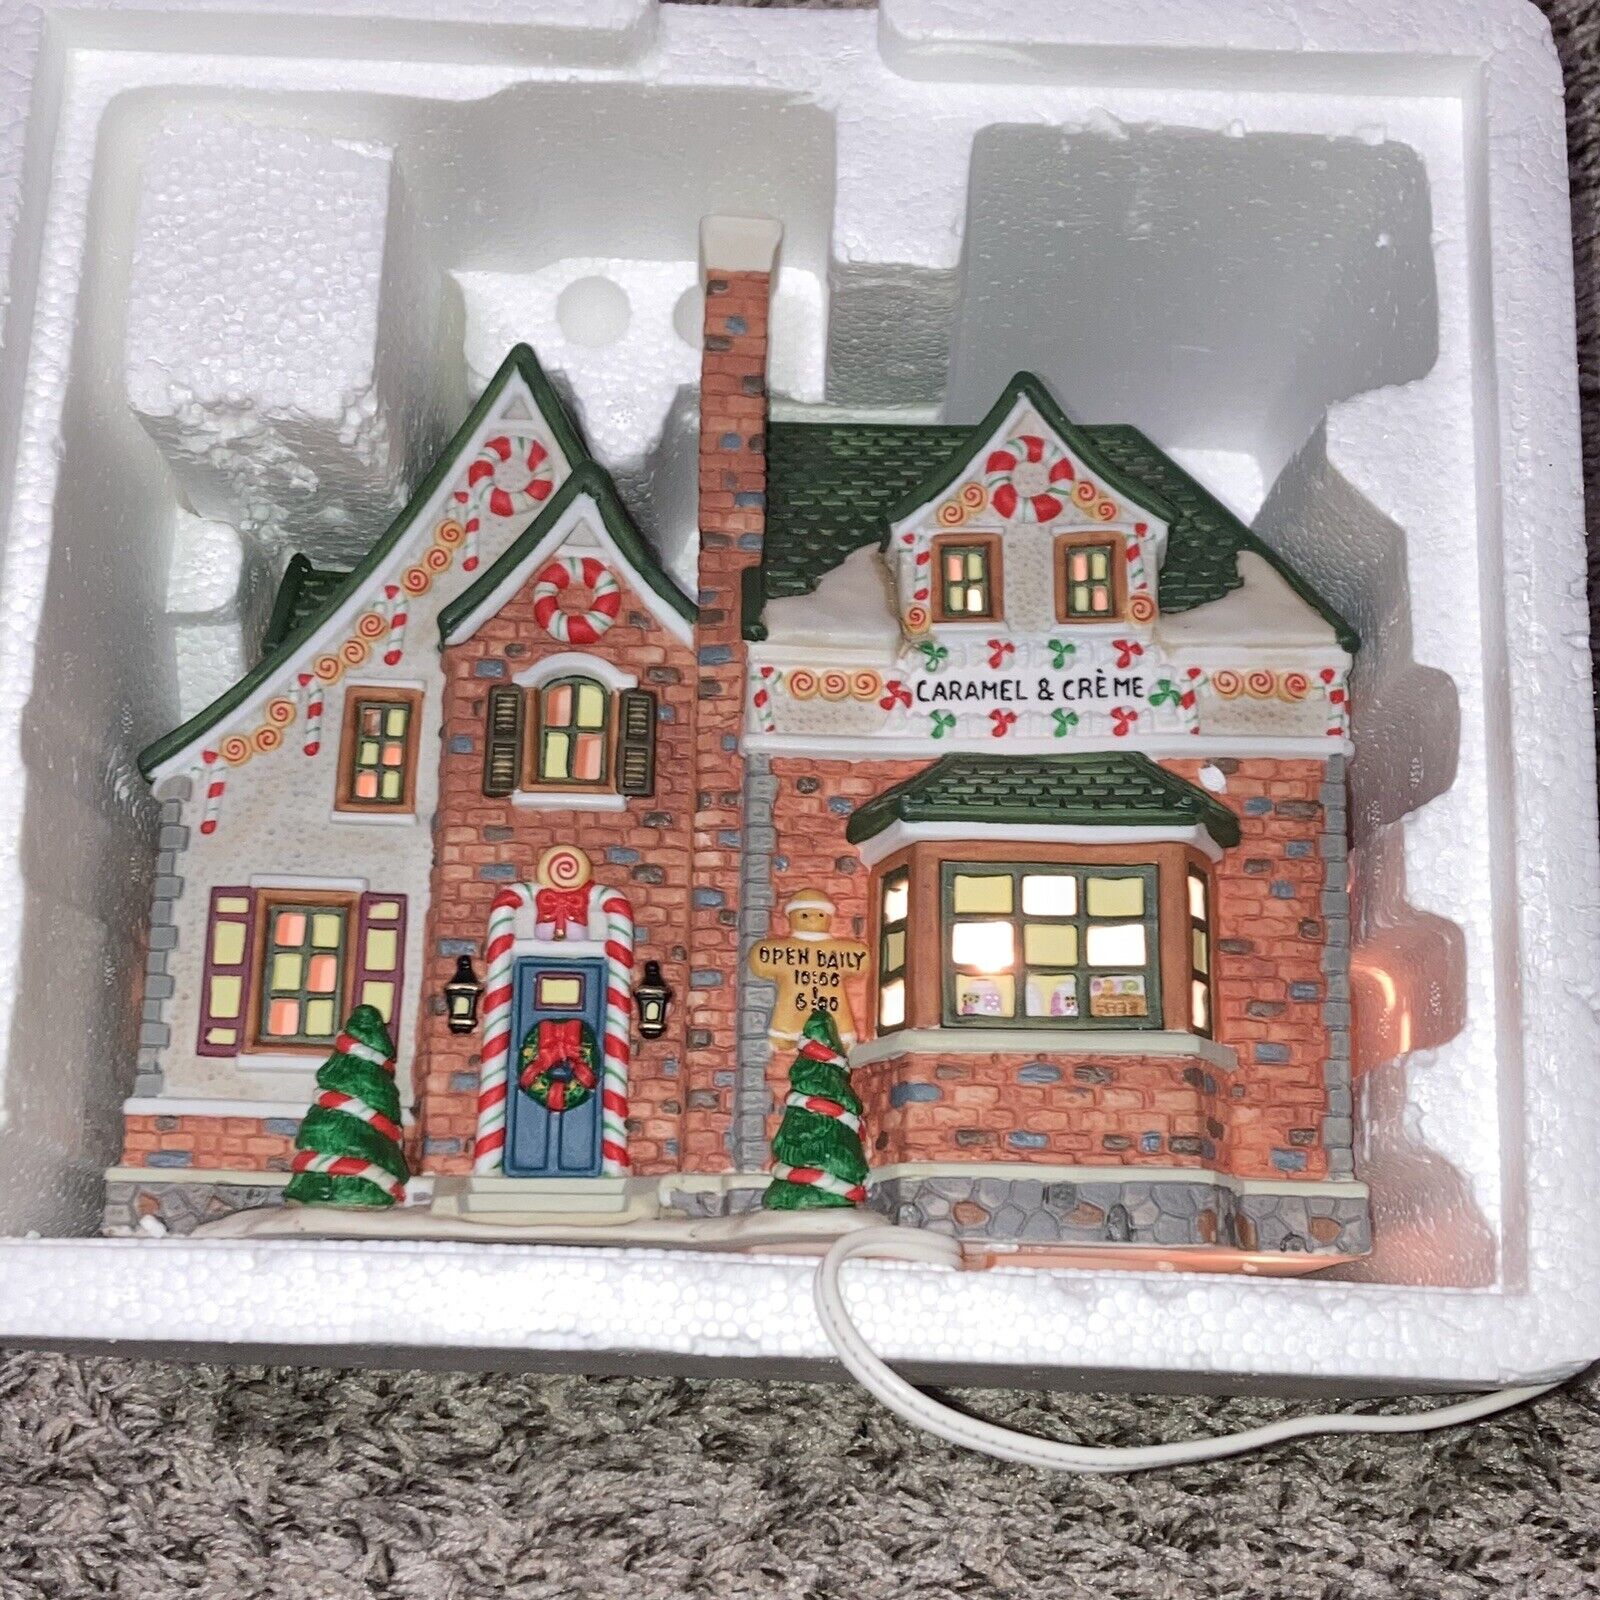 Santa's Workbench Christmas Village Caramel And Creme Candy Shop Lighted House